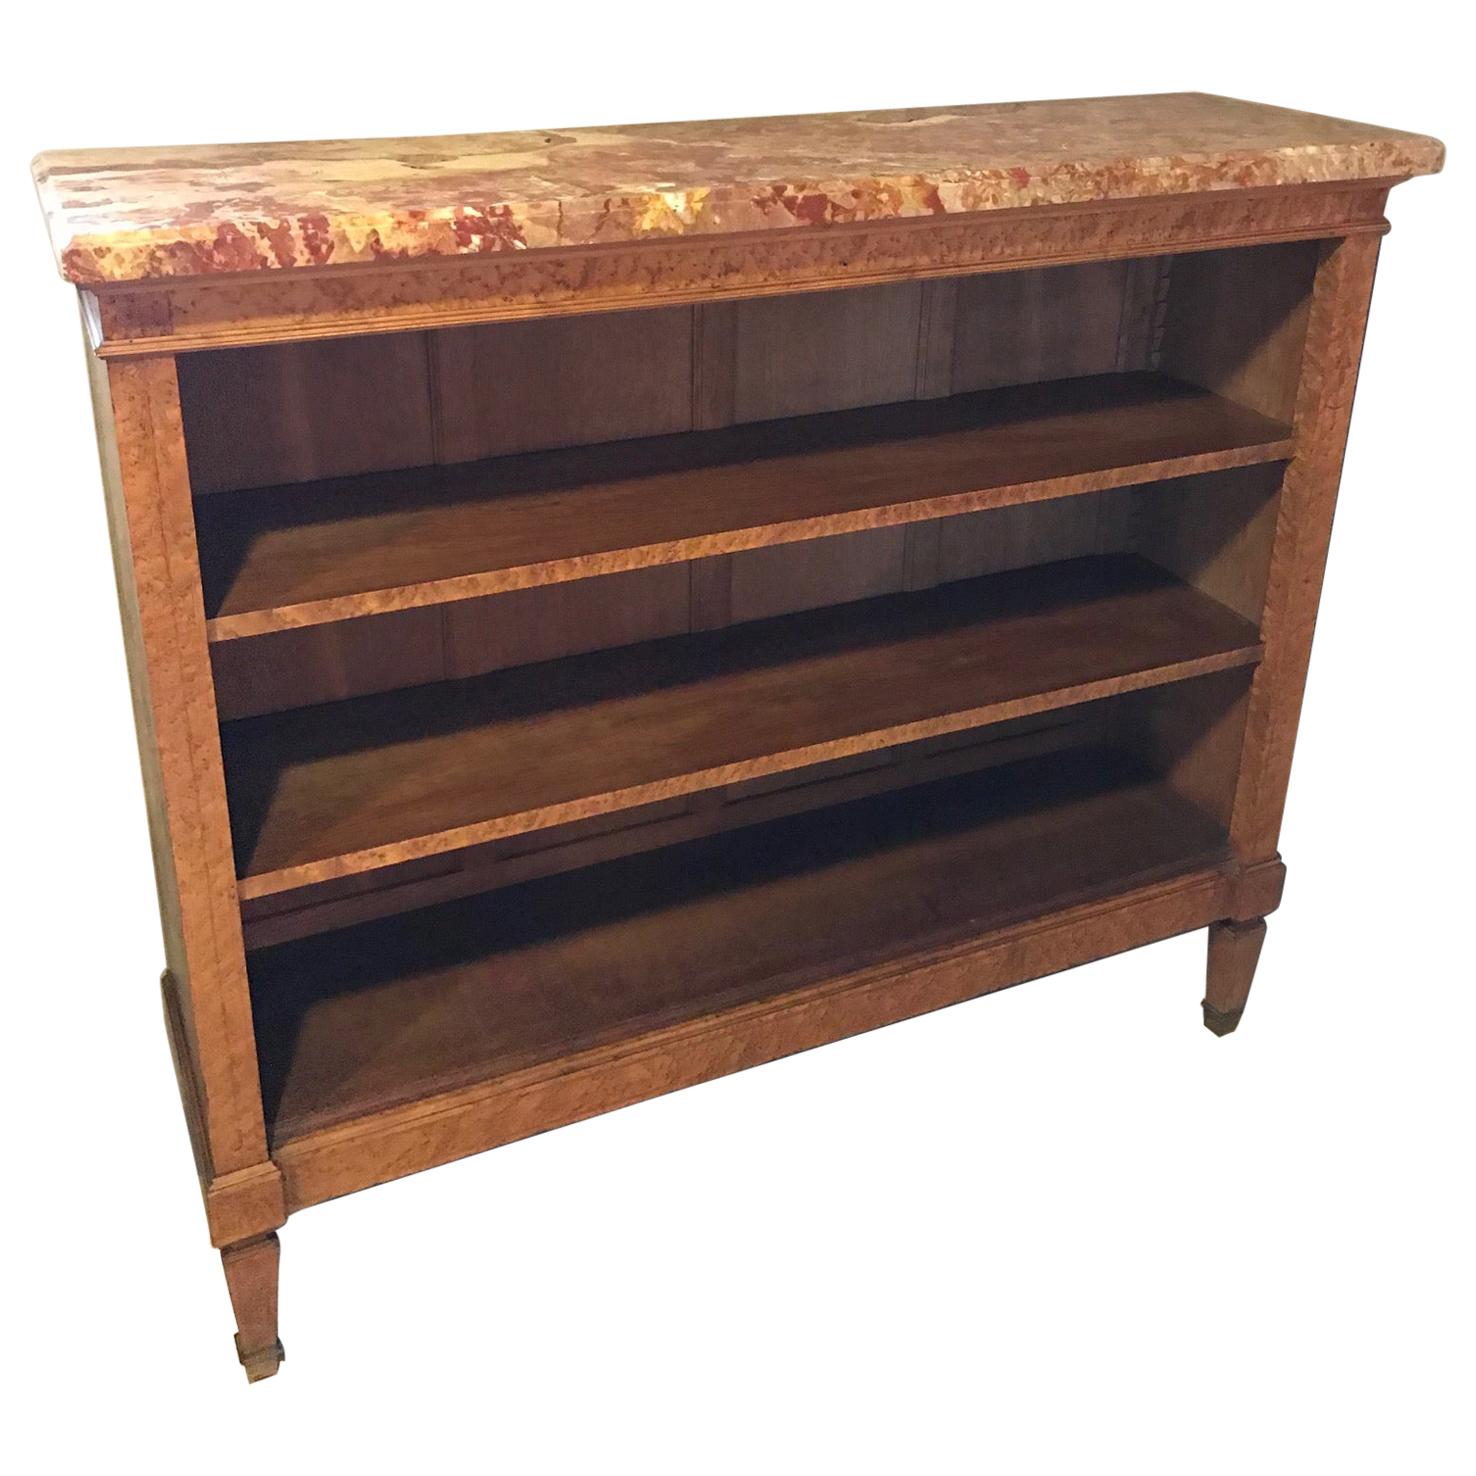 Early 20th Century French Sycamore Veneer and Marble Top Bibliotheque, 1920s For Sale